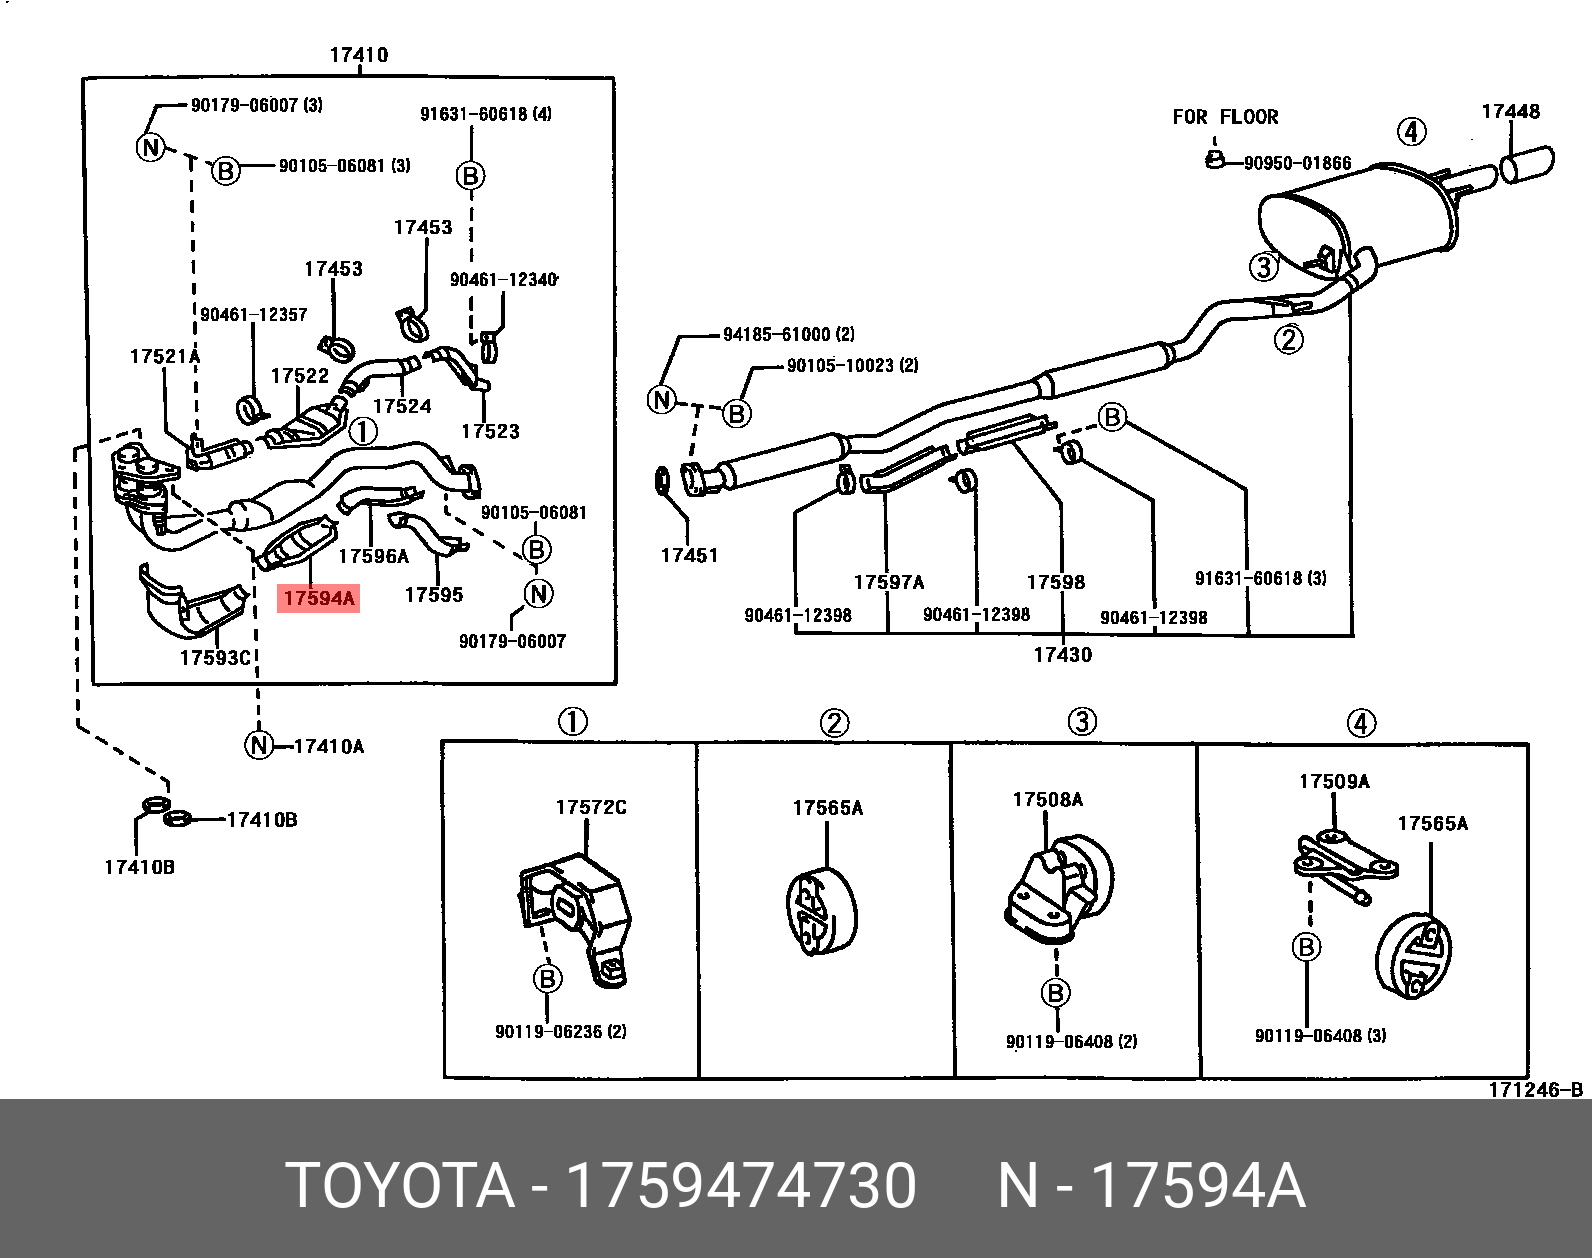 CALDINA 199708 - 200209, PROTECTOR, EXHAUST PIPE, LOWER NO.2